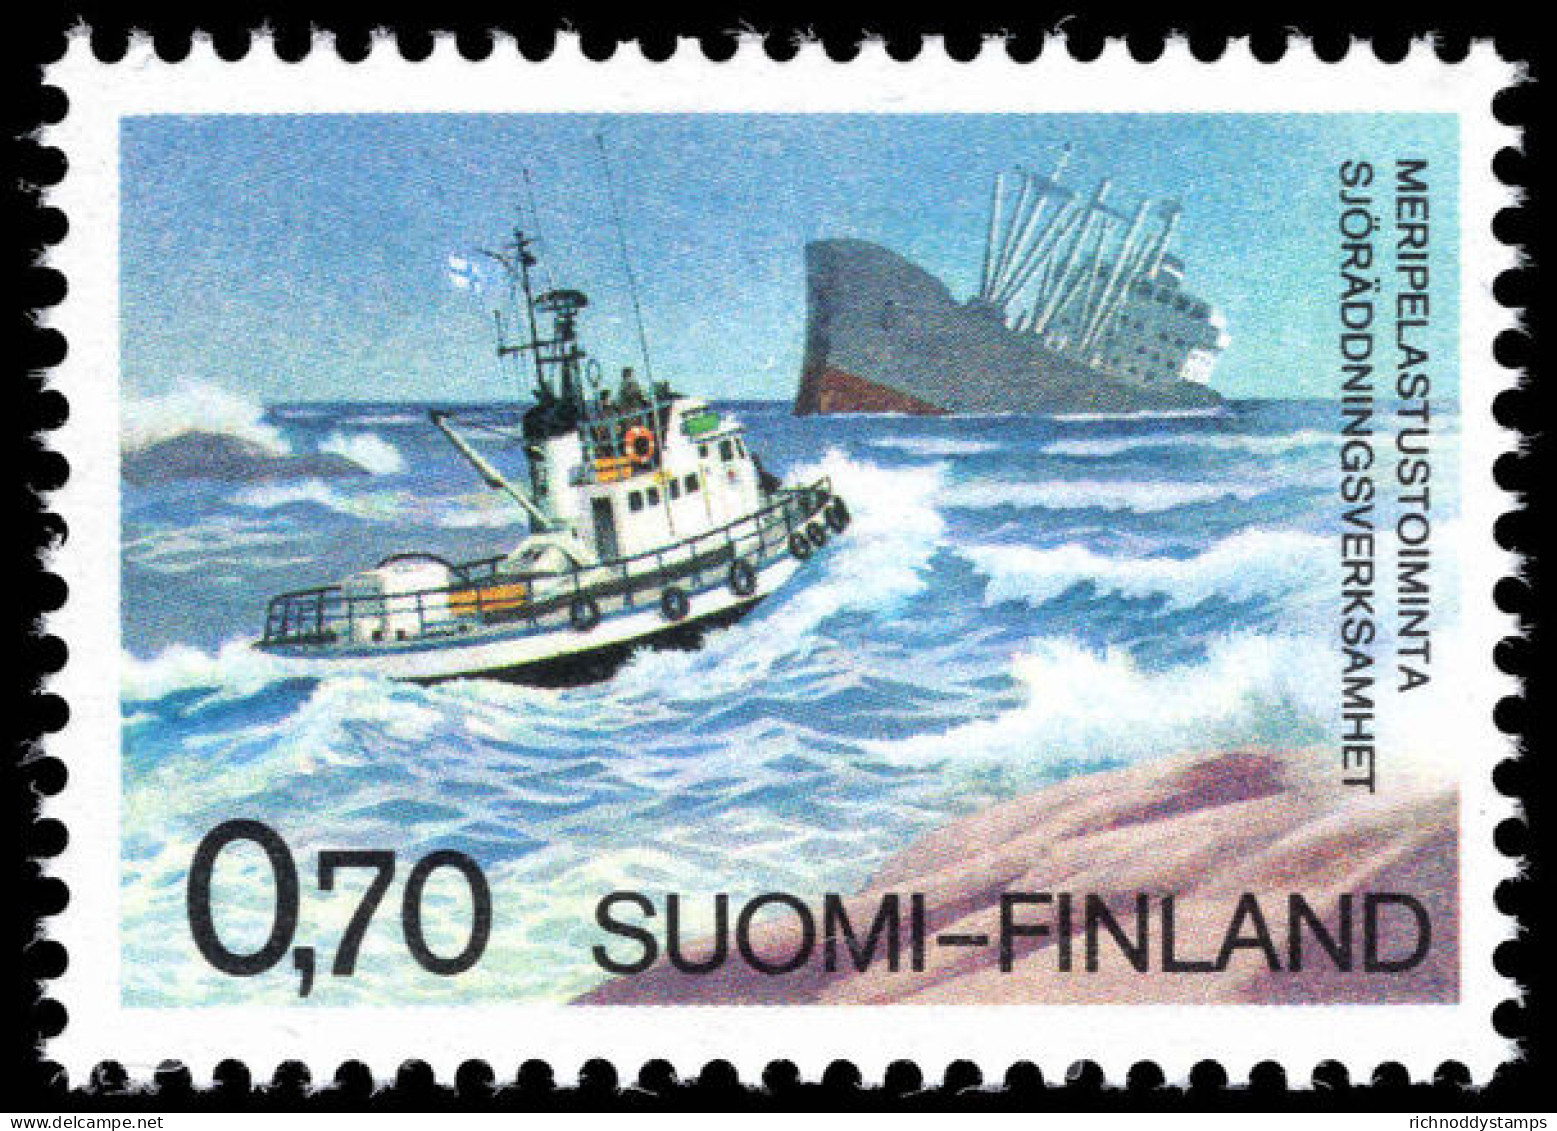 Finland 1975 12th International Salvage Conference Unmounted Mint. - Neufs